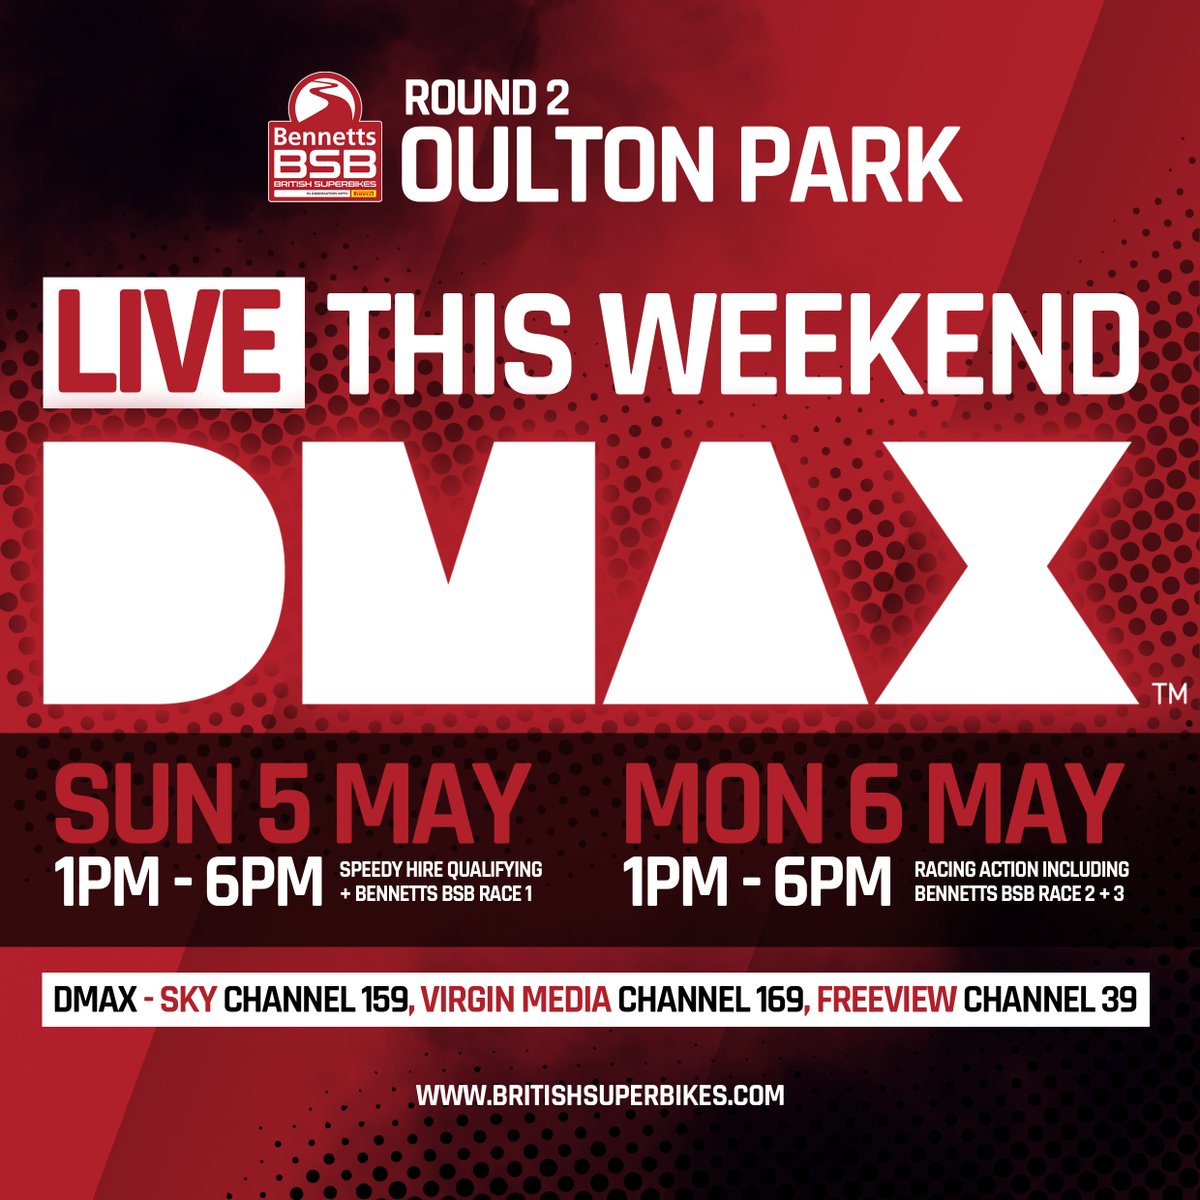 WATCH BENNETTS BSB FOR FREE THIS WEEKEND LIVE coverage will feature on DMAX from @Oulton_Park this Sunday and Bank Holiday Monday Watch all the @bennetts_bike BSB action live for free on Sky Channel 159, Virgin Media Channel 169, Freeview Channel 39